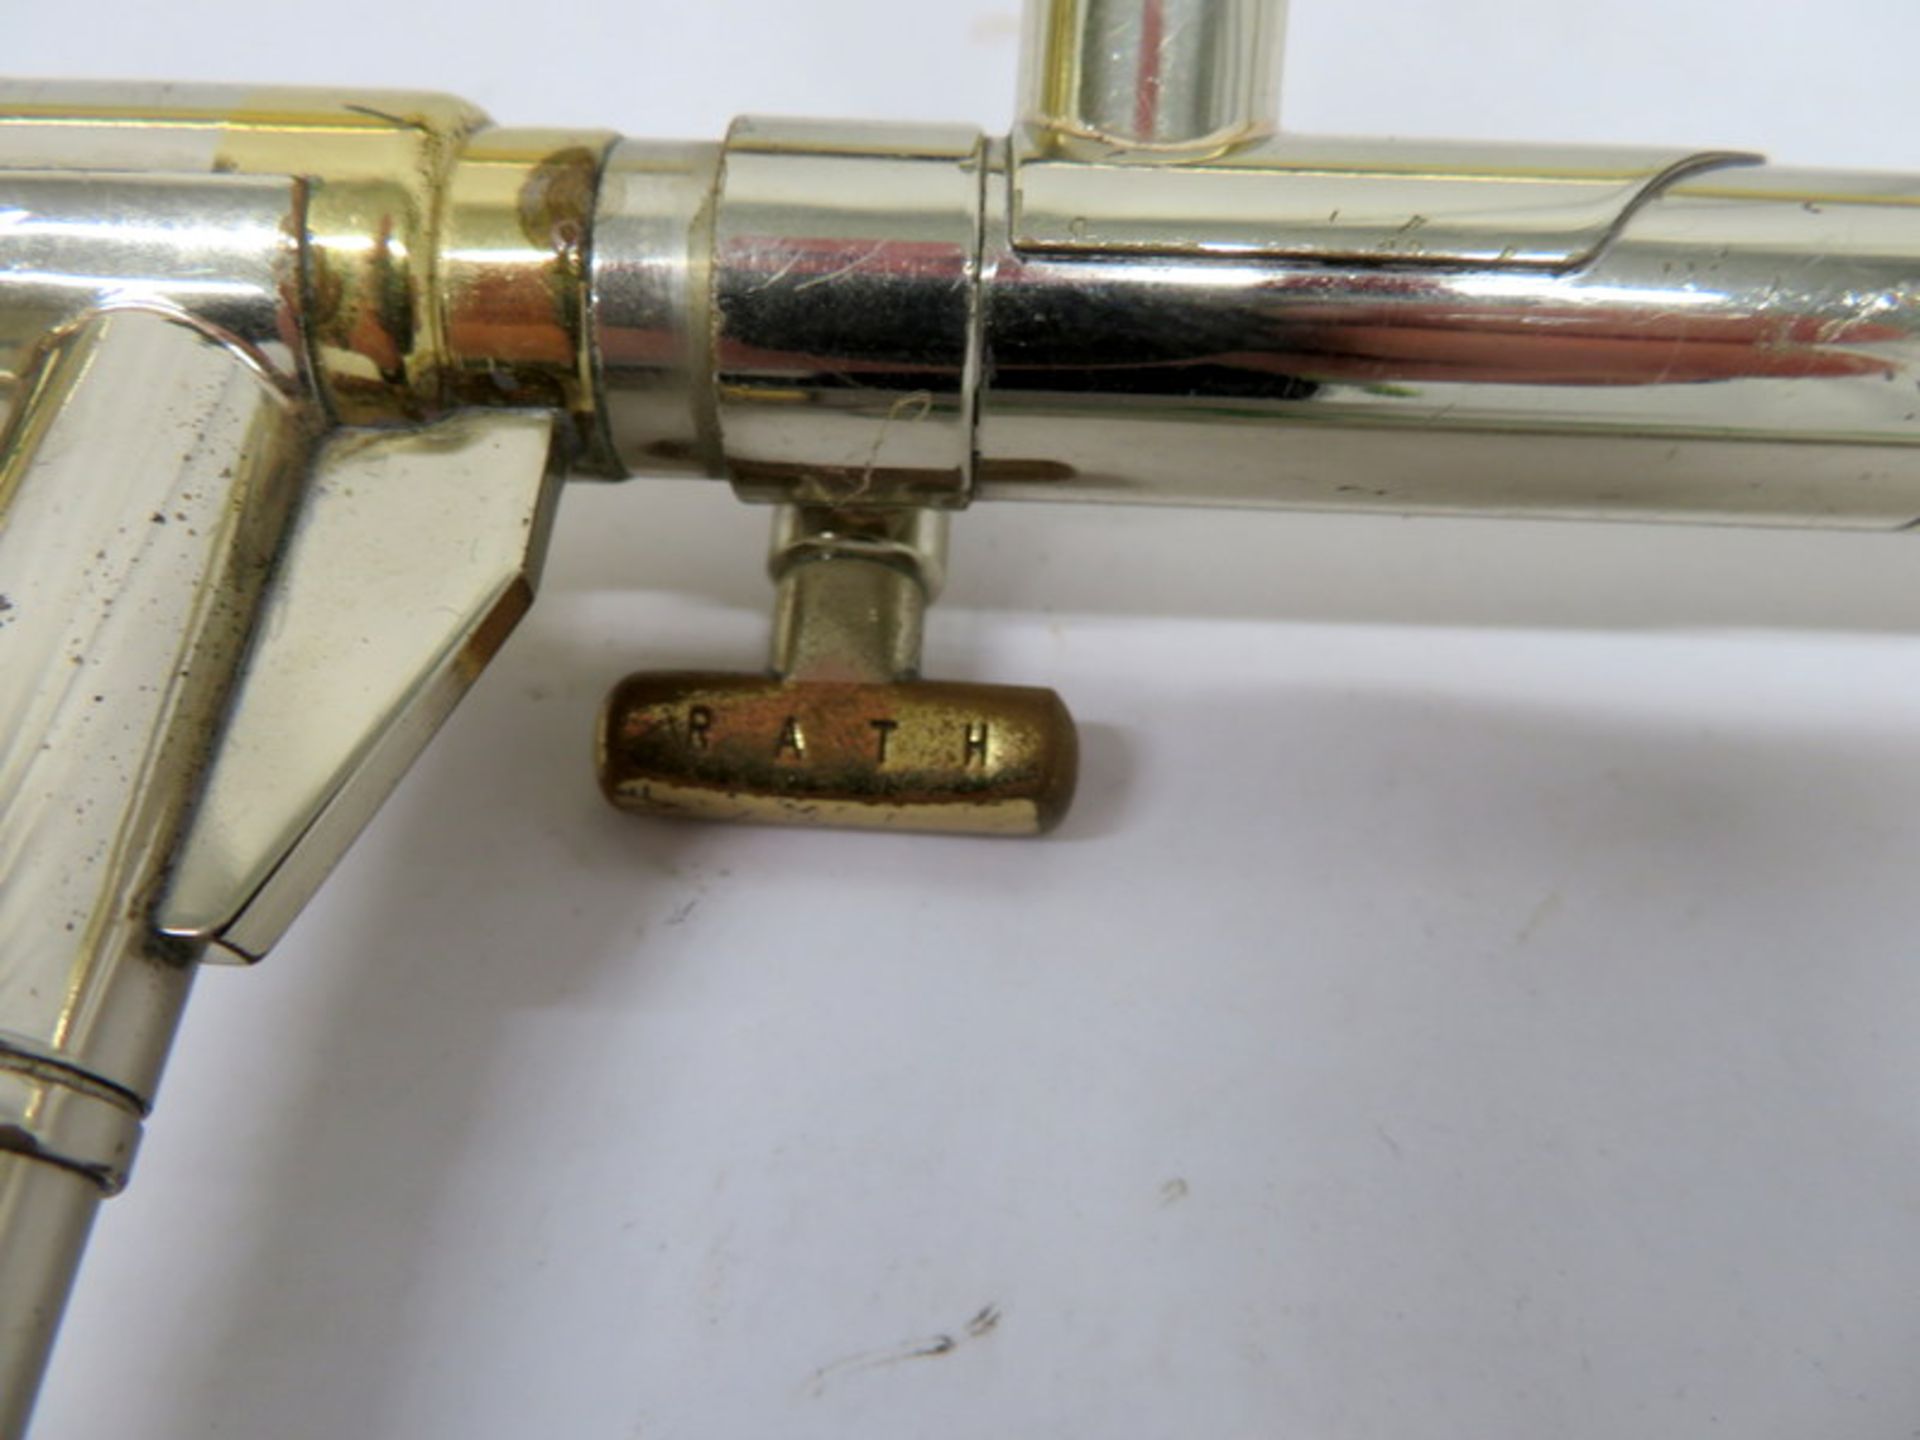 Rath R3 Trombone With Case. Serial Number:028.Please Note That This Item Has Not Be Tested - Image 11 of 15